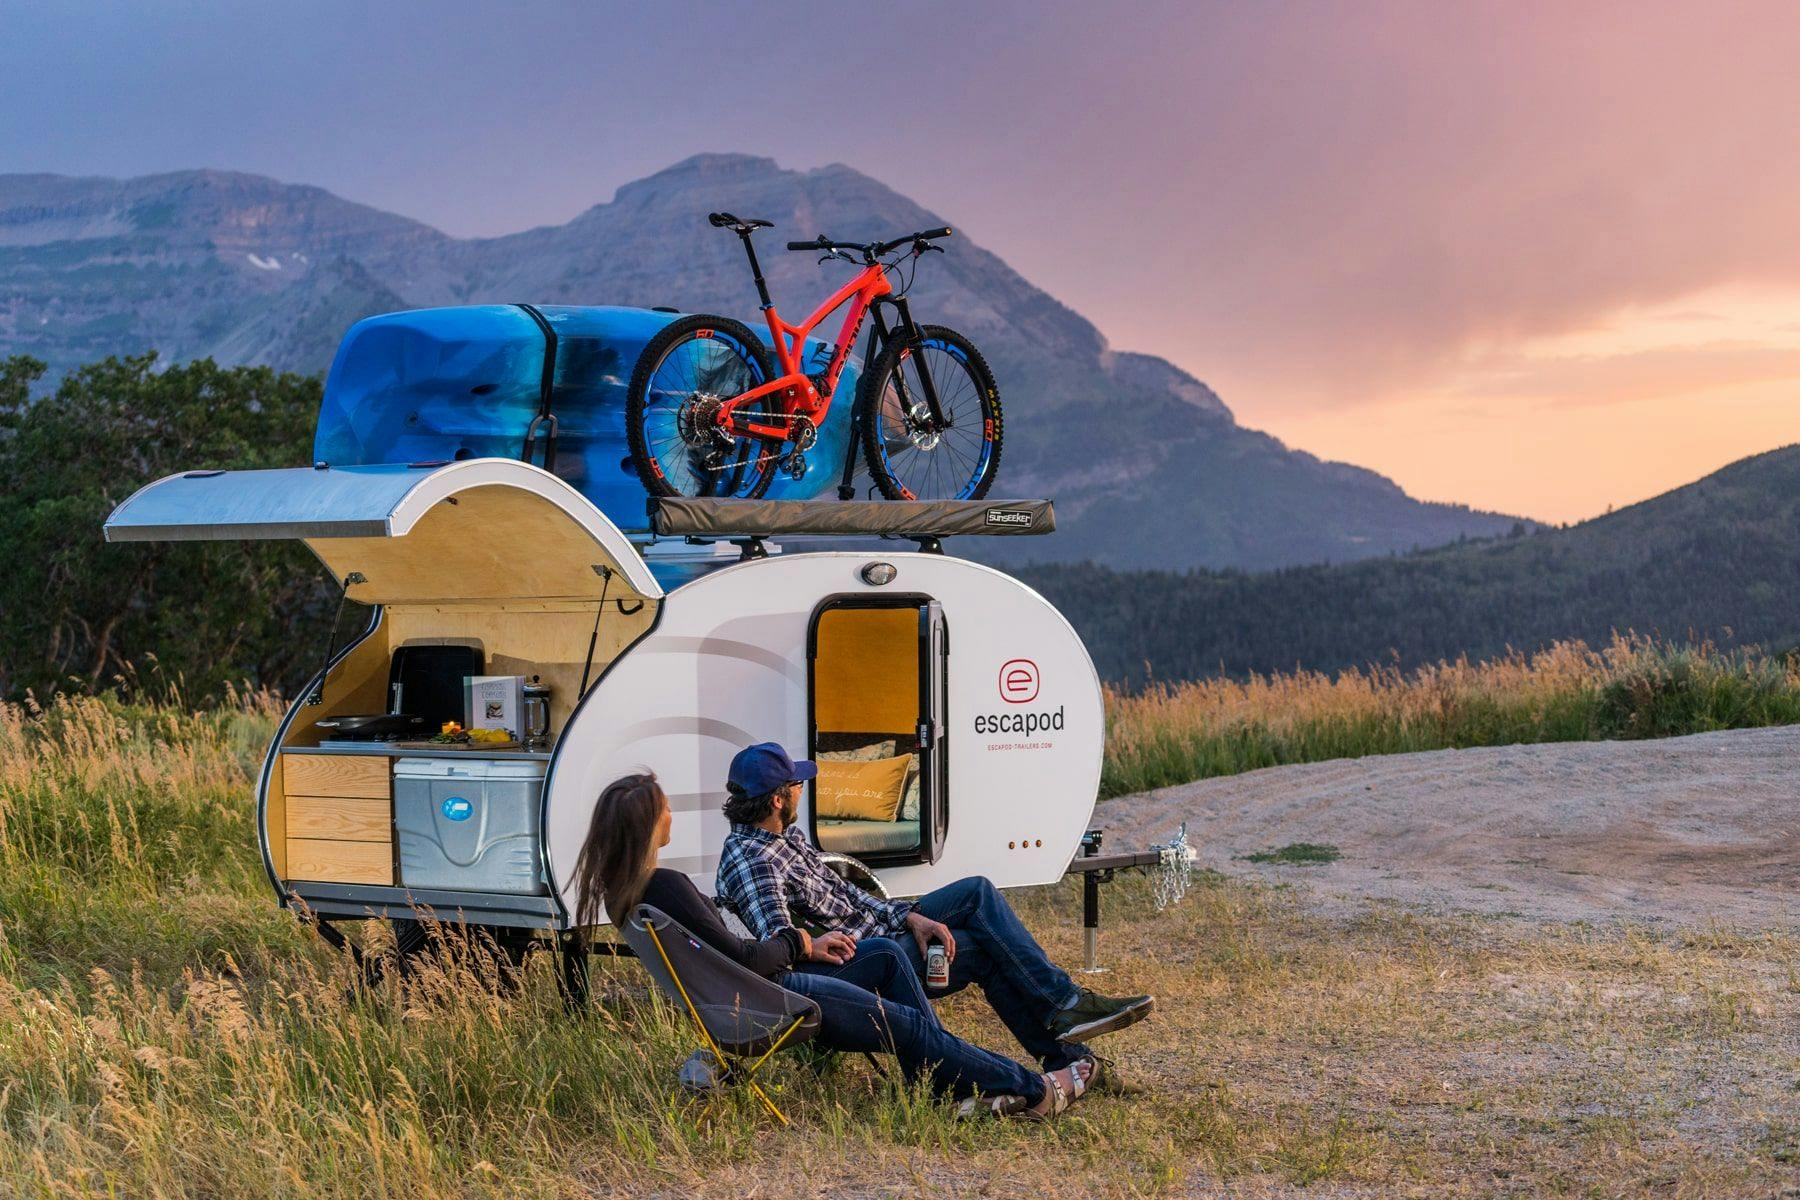 Co-founders of Escapod, Jen & Chris, lounging with one of their original teardrop trailer builds enjoying mountrain views.